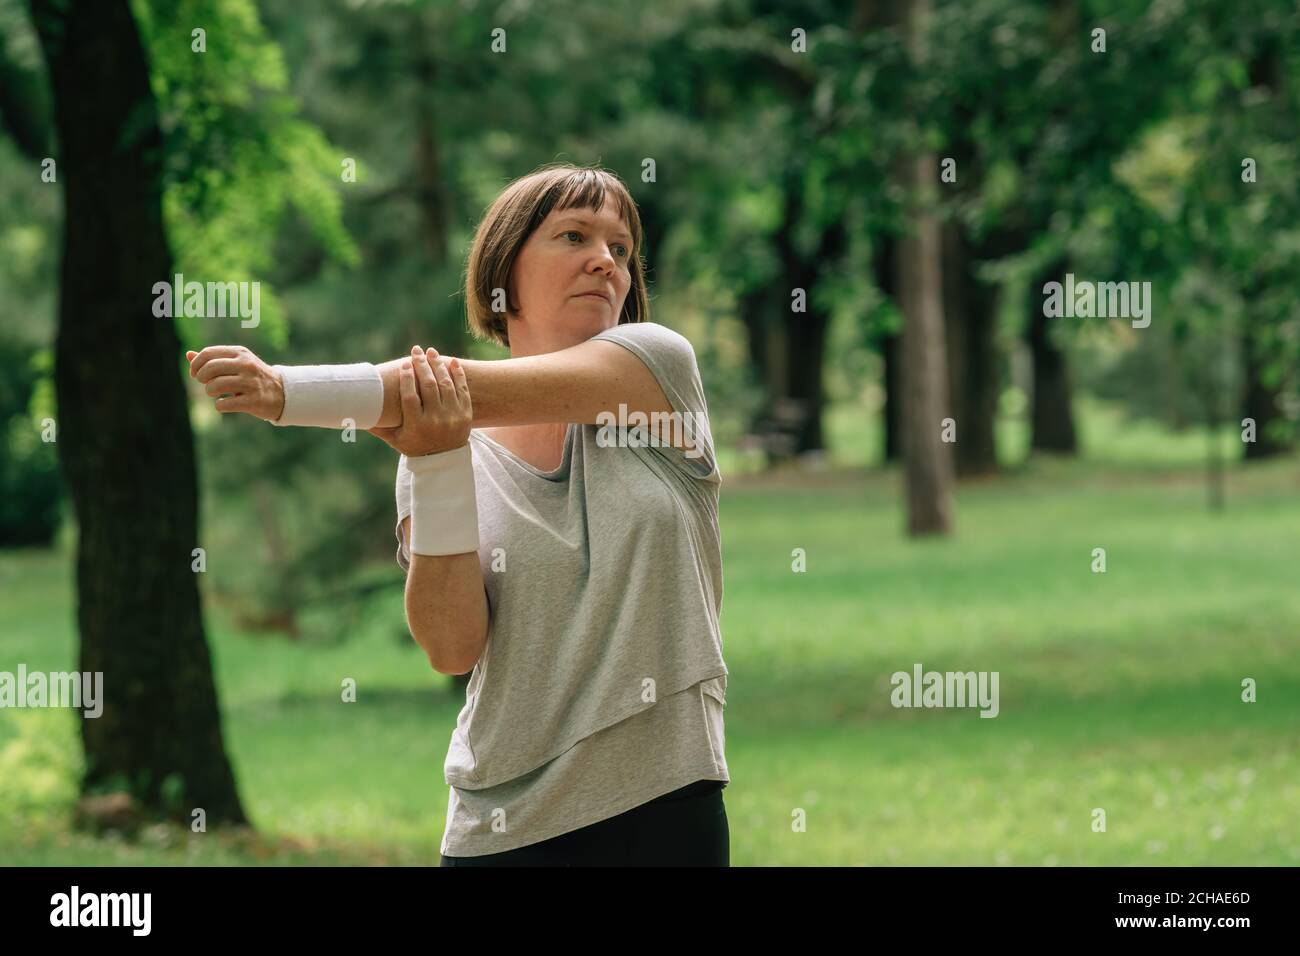 Female jogger stretching muscles and warming up for running exercise in park, selective focus Stock Photo